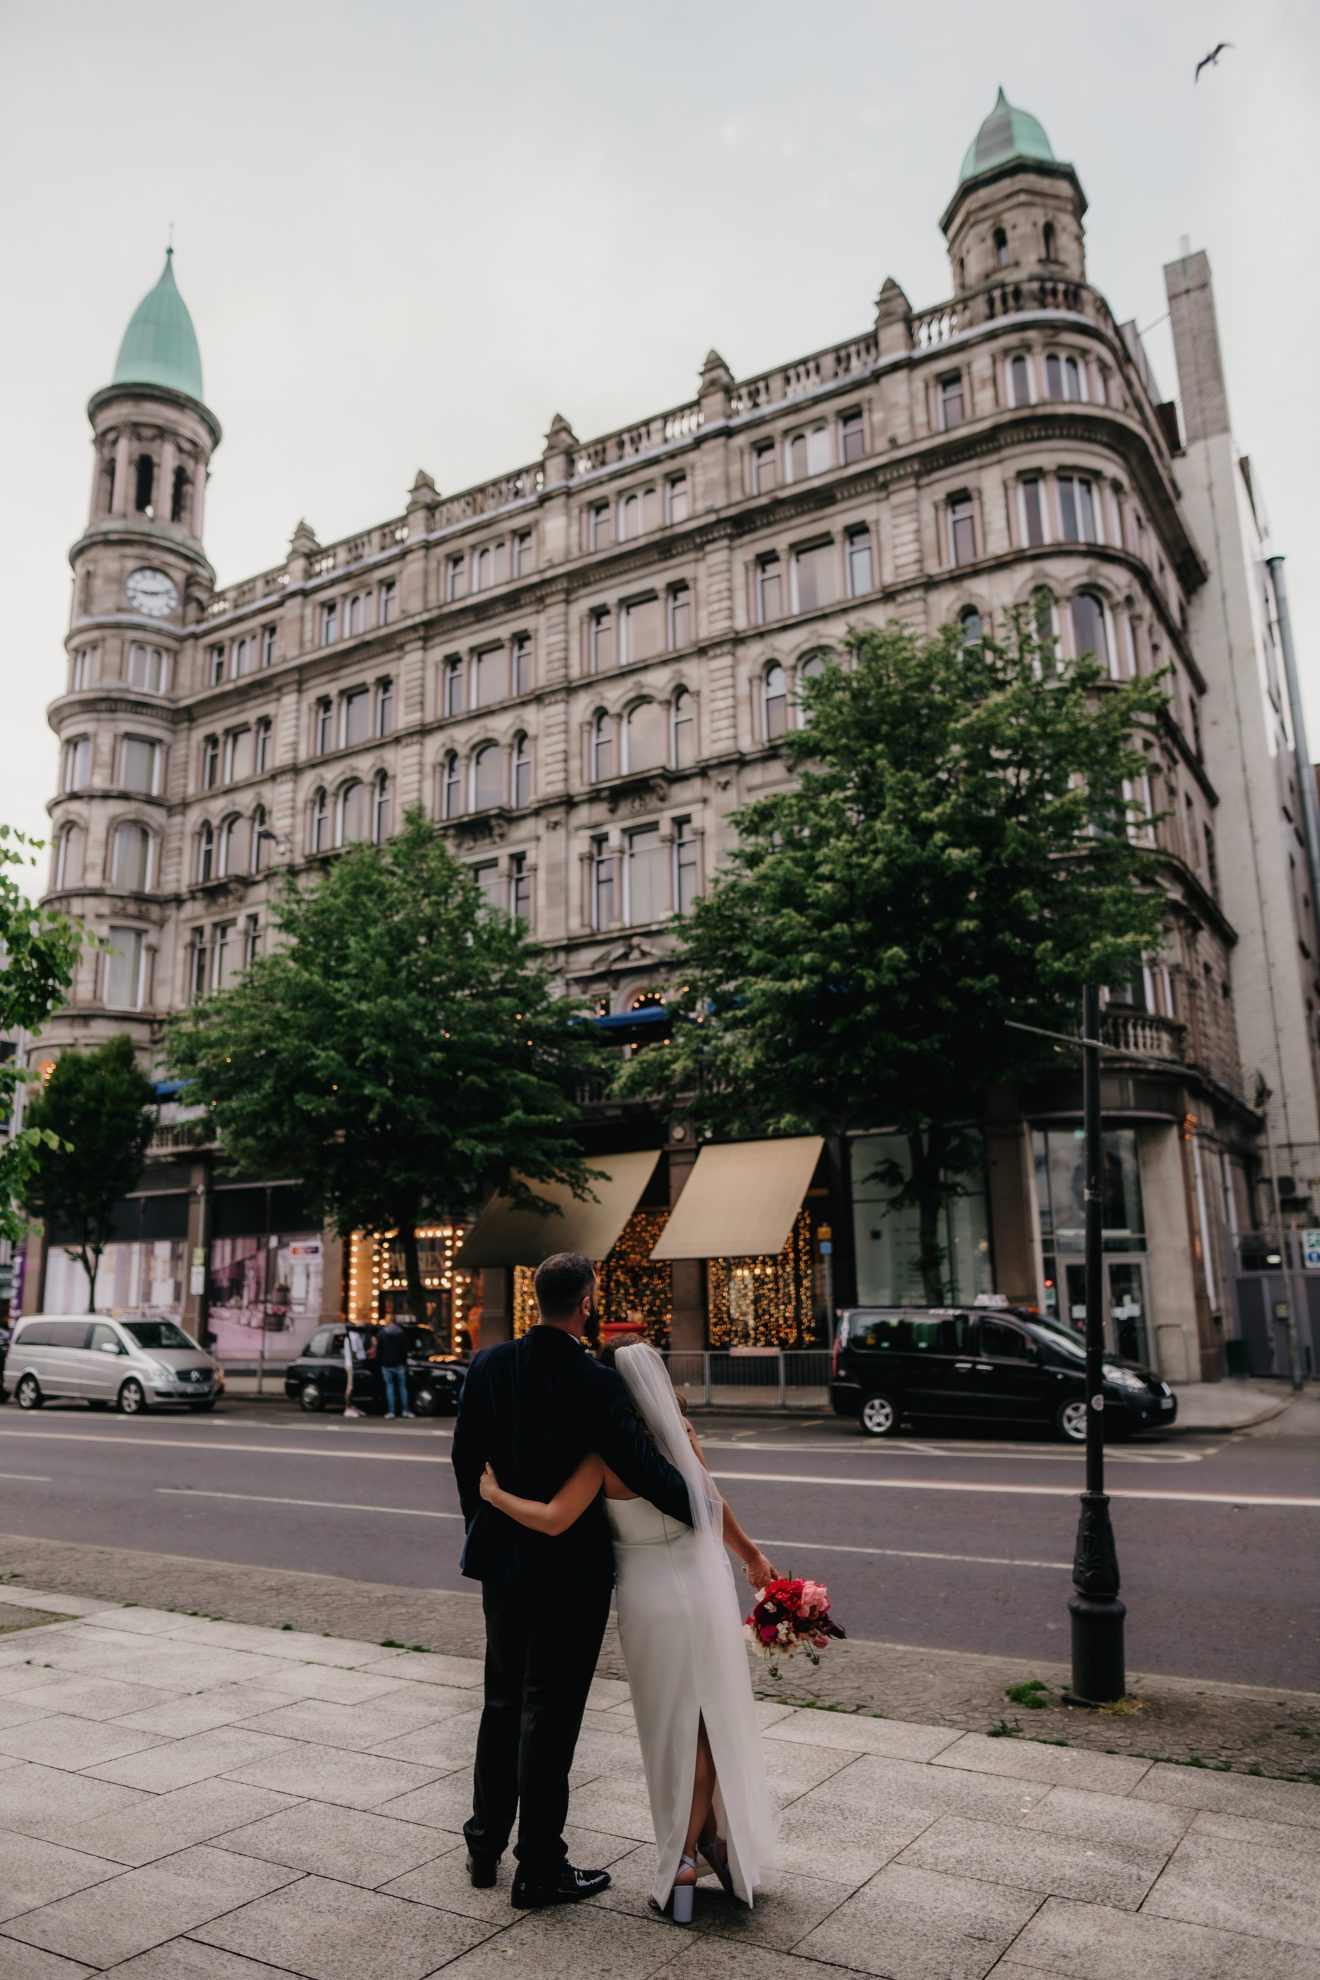 Jael and Greg embracing each other on their wedding day in Belfast City Centre